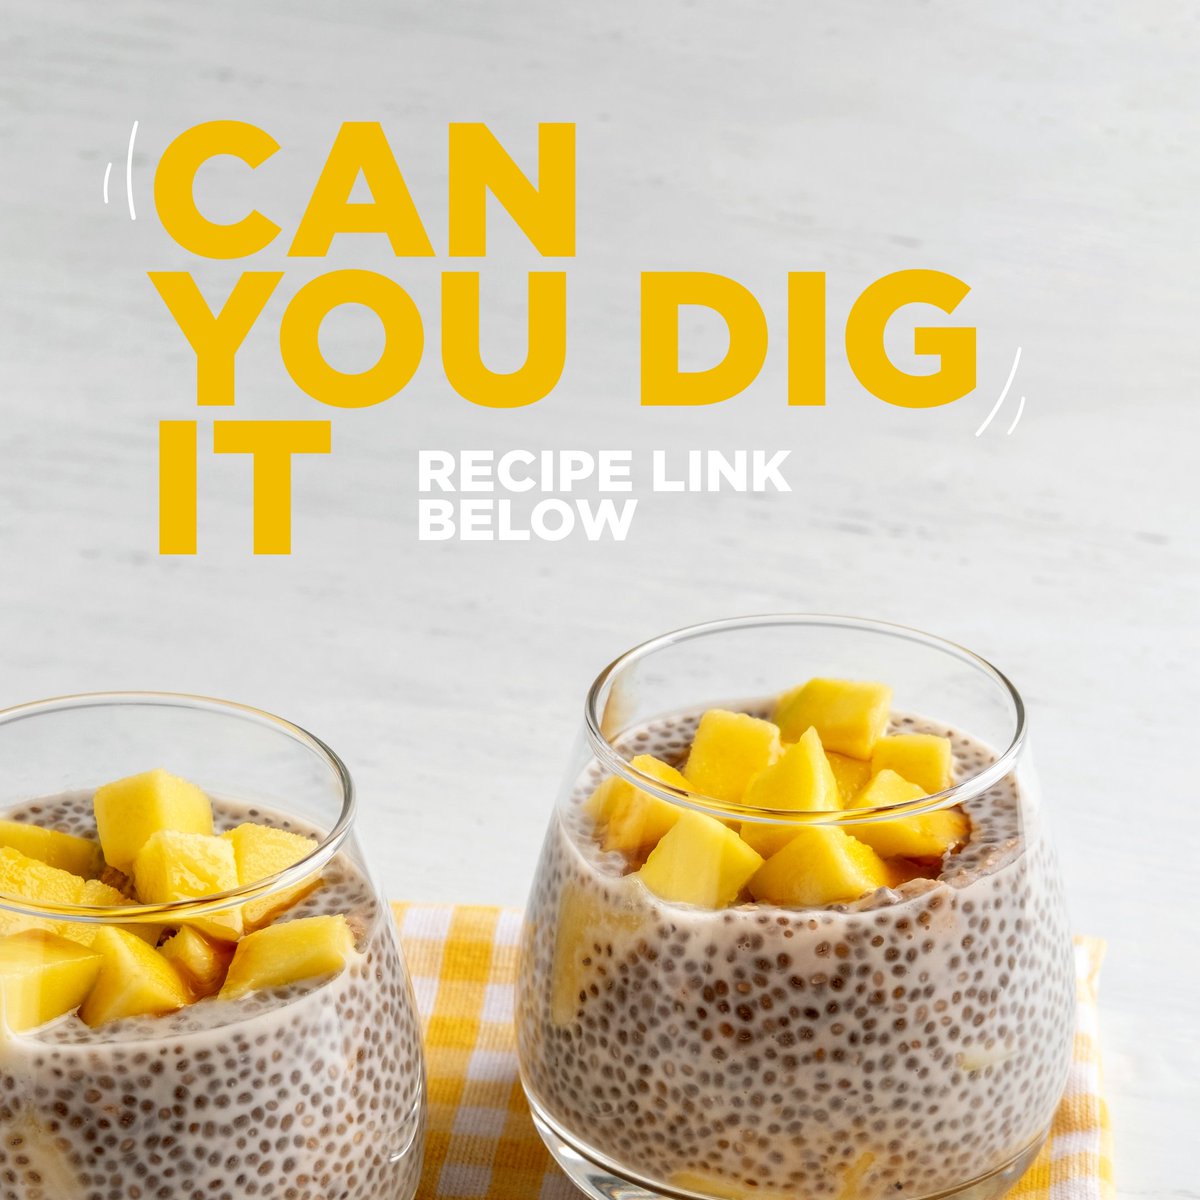 Show your puddin some love with a Creamy Overnight Chia Pudding ❤️. It’s so easy to make; it’s scandalous how good it tastes and how healthy it is. Cows milk, chia seeds and honey for the win, check it out: bitly.ws/3hAQ6.
 
#ChiaPudding #HealthyRecipes #EnjoyDairy